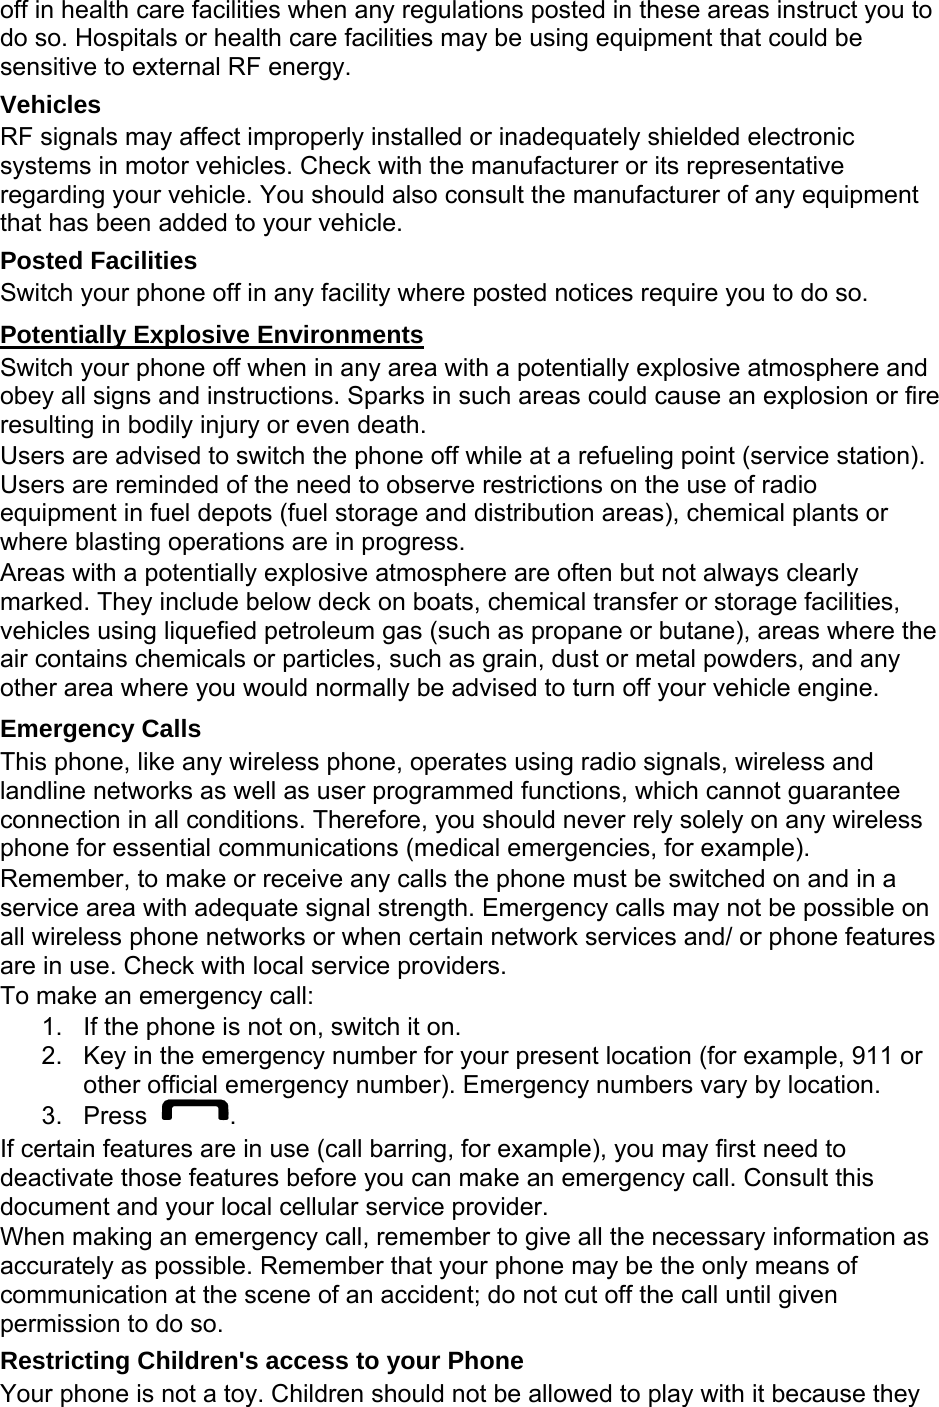 off in health care facilities when any regulations posted in these areas instruct you to do so. Hospitals or health care facilities may be using equipment that could be sensitive to external RF energy. Vehicles RF signals may affect improperly installed or inadequately shielded electronic systems in motor vehicles. Check with the manufacturer or its representative regarding your vehicle. You should also consult the manufacturer of any equipment that has been added to your vehicle. Posted Facilities Switch your phone off in any facility where posted notices require you to do so. Potentially Explosive Environments Switch your phone off when in any area with a potentially explosive atmosphere and obey all signs and instructions. Sparks in such areas could cause an explosion or fire resulting in bodily injury or even death. Users are advised to switch the phone off while at a refueling point (service station). Users are reminded of the need to observe restrictions on the use of radio equipment in fuel depots (fuel storage and distribution areas), chemical plants or where blasting operations are in progress. Areas with a potentially explosive atmosphere are often but not always clearly marked. They include below deck on boats, chemical transfer or storage facilities, vehicles using liquefied petroleum gas (such as propane or butane), areas where the air contains chemicals or particles, such as grain, dust or metal powders, and any other area where you would normally be advised to turn off your vehicle engine. Emergency Calls This phone, like any wireless phone, operates using radio signals, wireless and landline networks as well as user programmed functions, which cannot guarantee connection in all conditions. Therefore, you should never rely solely on any wireless phone for essential communications (medical emergencies, for example). Remember, to make or receive any calls the phone must be switched on and in a service area with adequate signal strength. Emergency calls may not be possible on all wireless phone networks or when certain network services and/ or phone features are in use. Check with local service providers. To make an emergency call: 1.  If the phone is not on, switch it on. 2.  Key in the emergency number for your present location (for example, 911 or other official emergency number). Emergency numbers vary by location. 3. Press  . If certain features are in use (call barring, for example), you may first need to deactivate those features before you can make an emergency call. Consult this document and your local cellular service provider. When making an emergency call, remember to give all the necessary information as accurately as possible. Remember that your phone may be the only means of communication at the scene of an accident; do not cut off the call until given permission to do so. Restricting Children&apos;s access to your Phone Your phone is not a toy. Children should not be allowed to play with it because they 